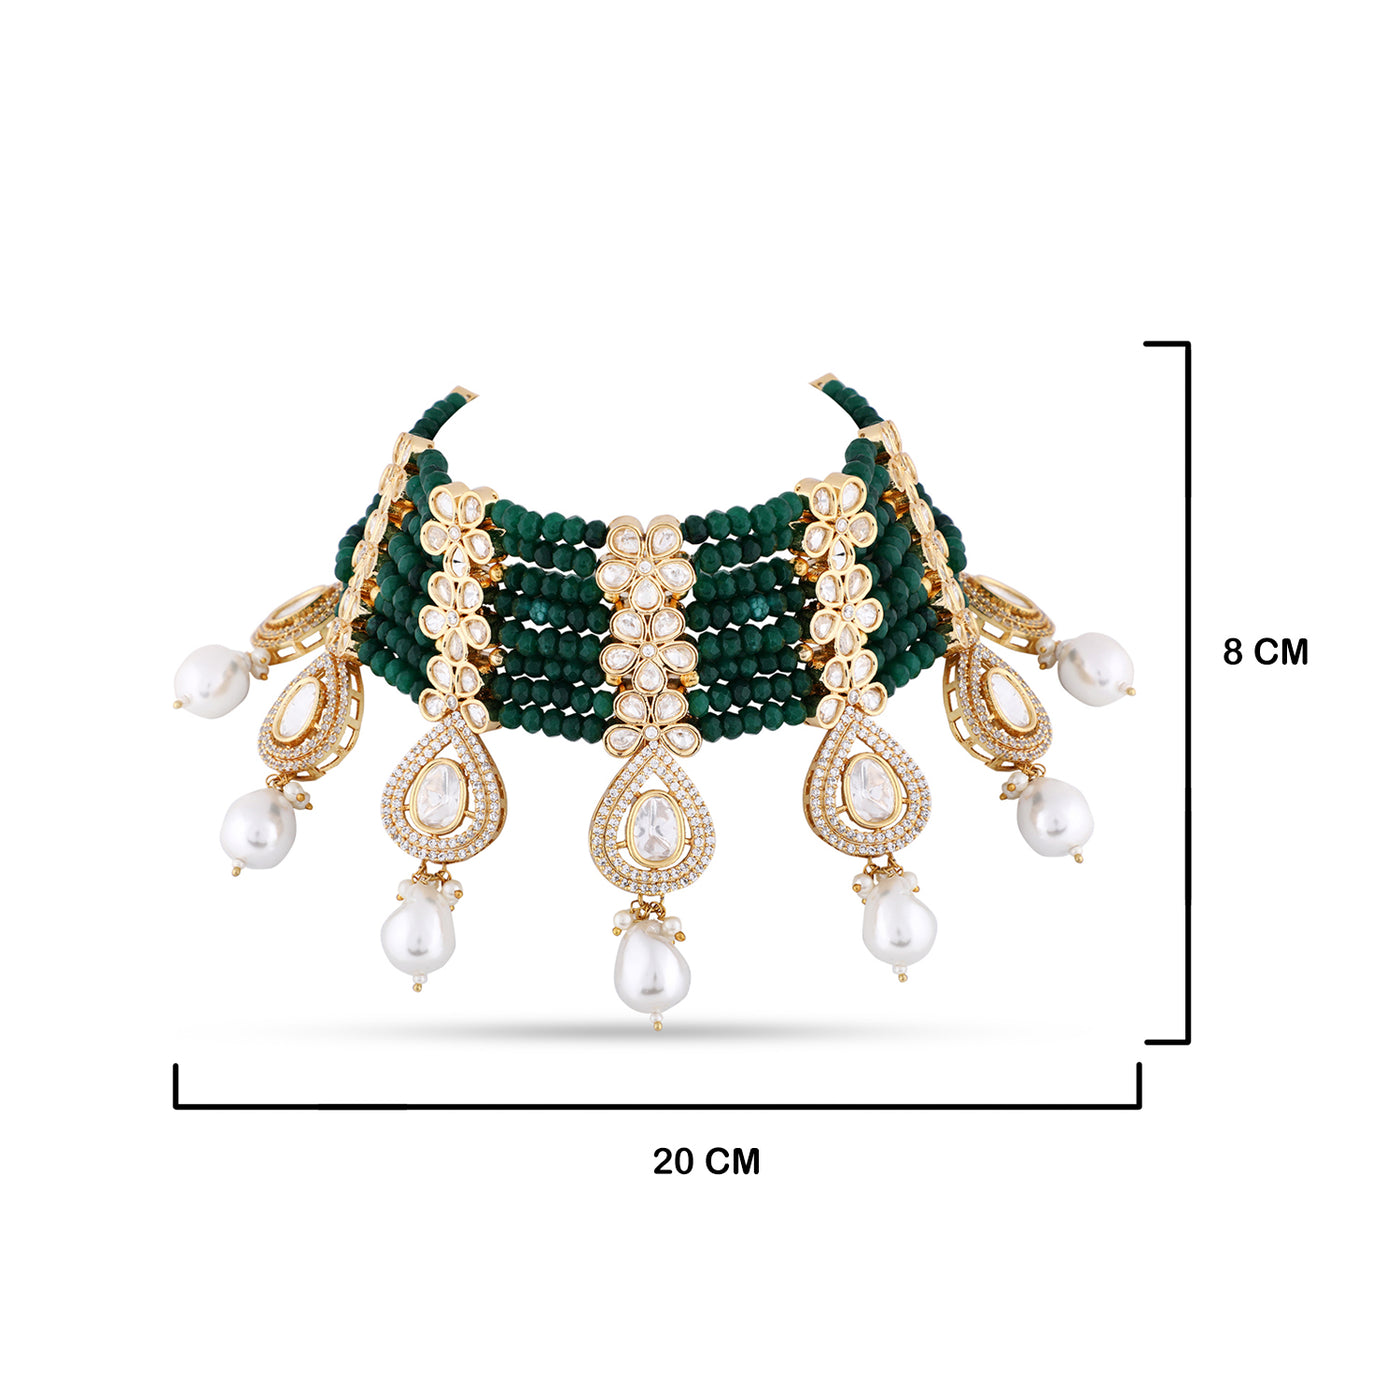 Green Bead and Polki Choker with measurements in cm. 20cm by 8cm.